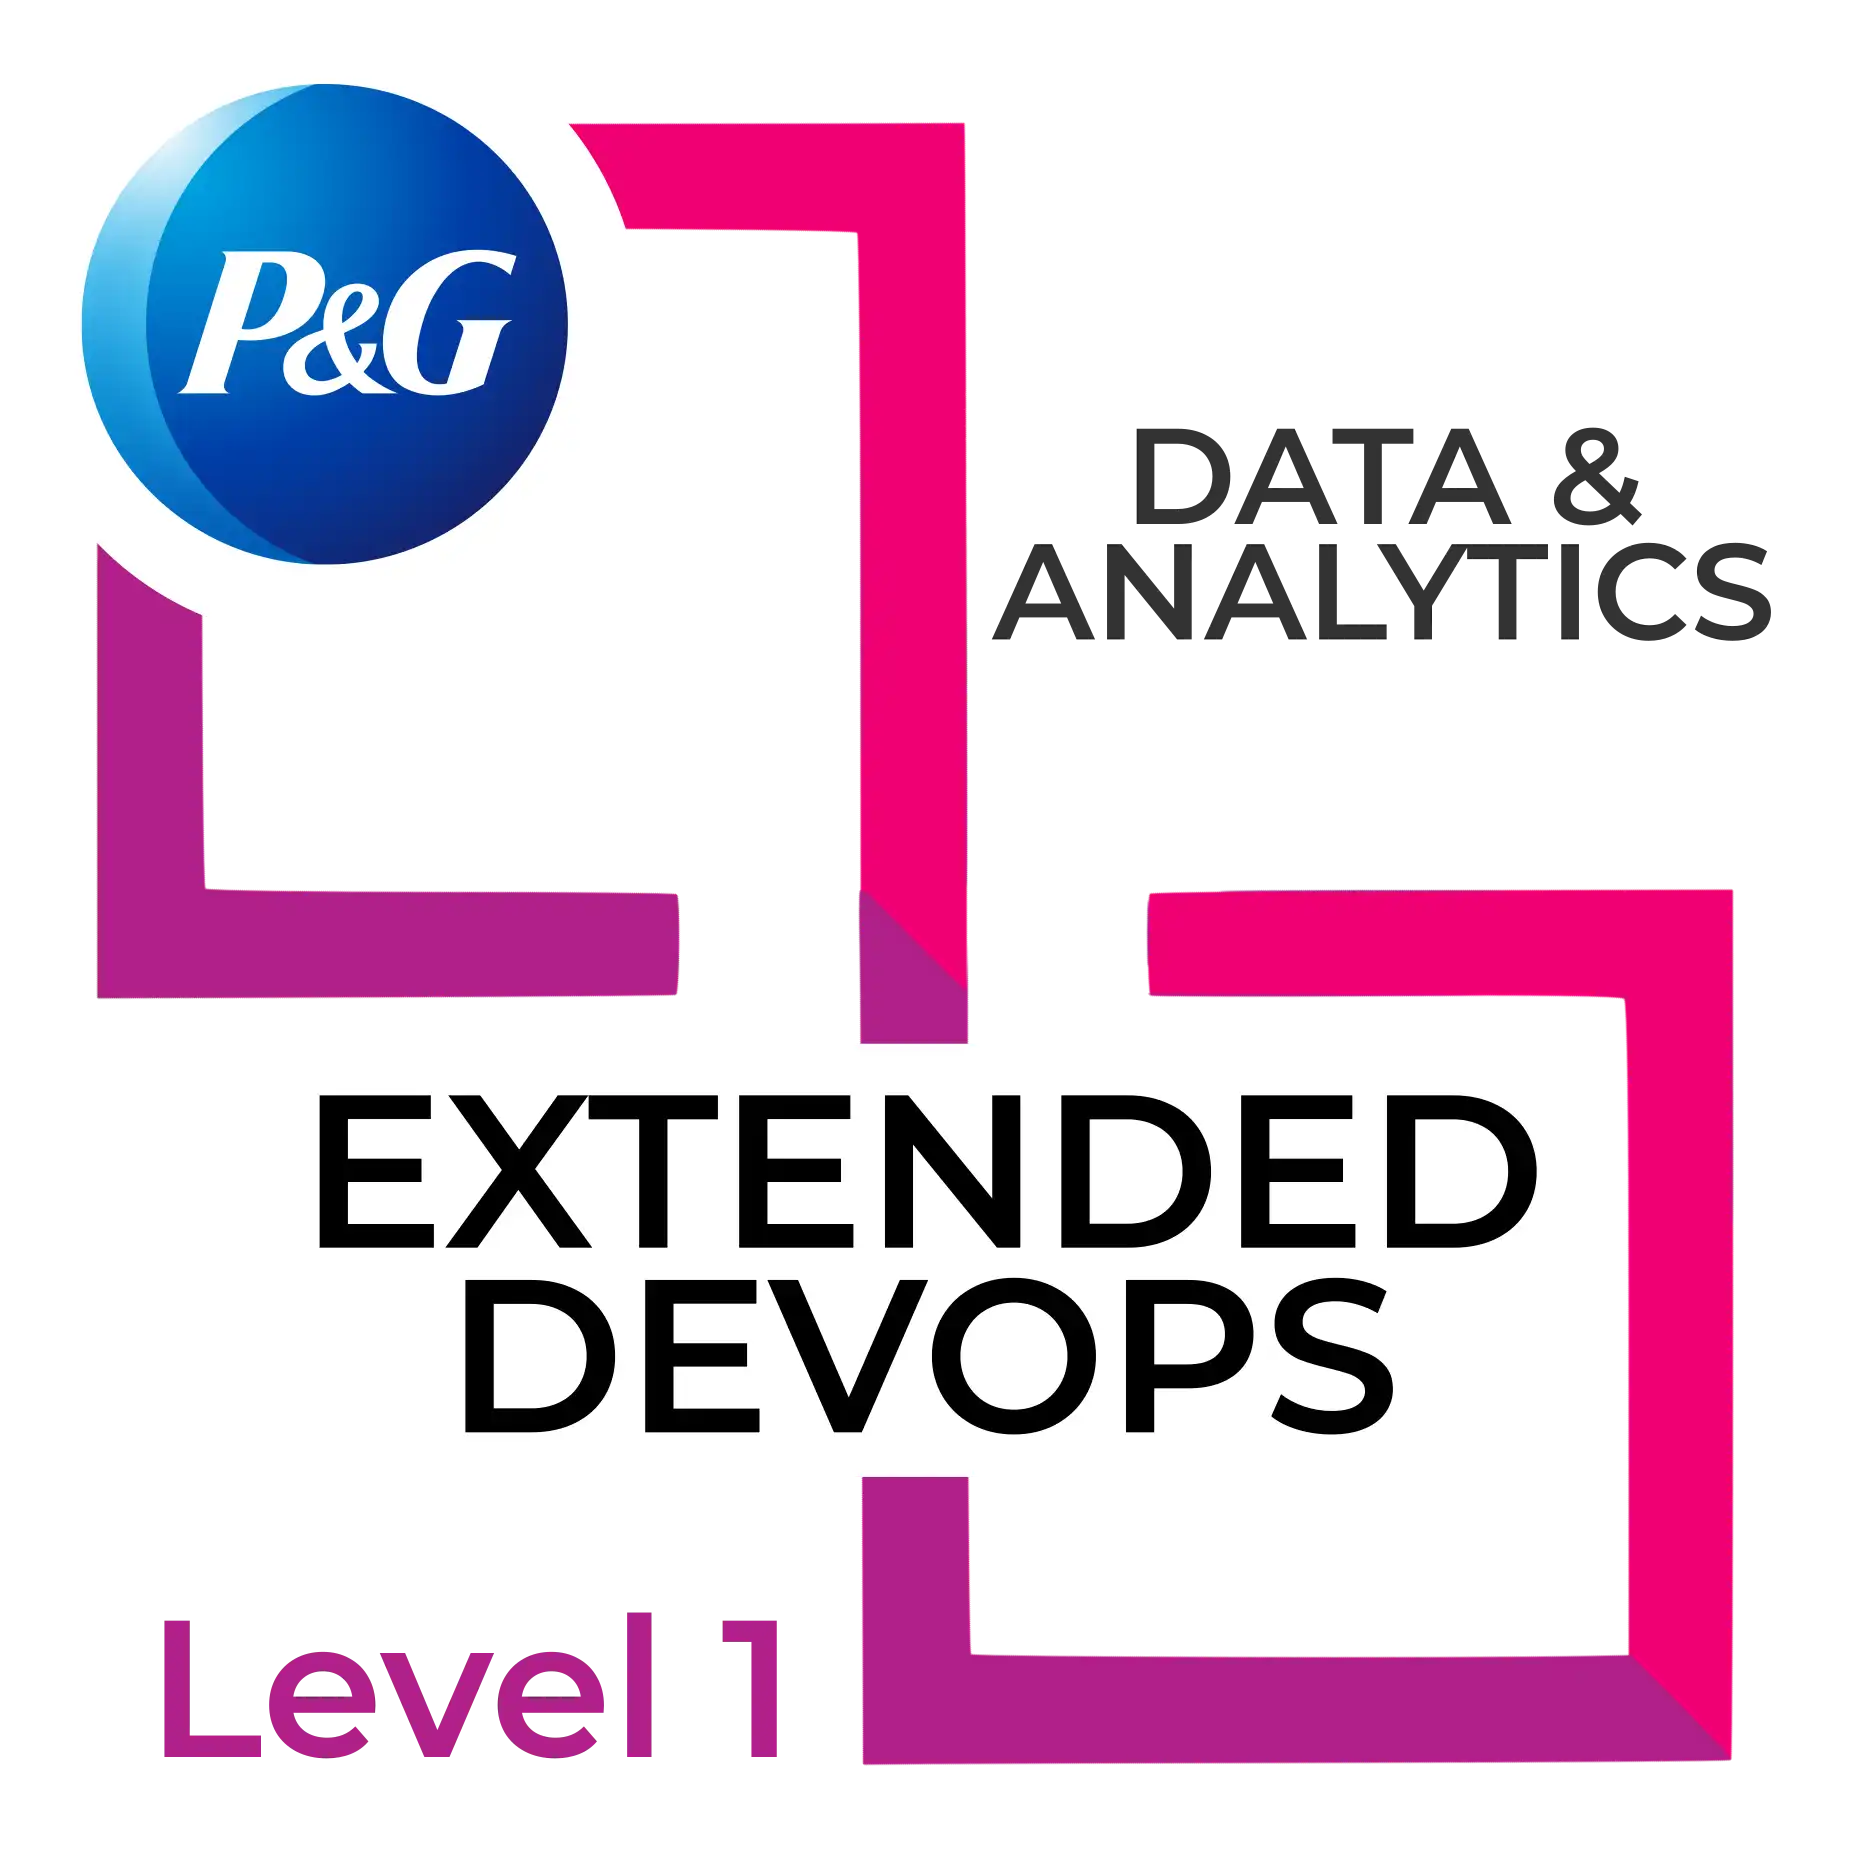 D&A Extended DevOps (level 1) at P&G,The earner is capable to develop Data & Analytics Applications in Cloud environments, leveraging key components such as storage accounts, computing and reporting layers by creating E2E Data Pipelines, from ingesting data from sources up to delivering reporting/presentation layers to be leveraged by end-users.